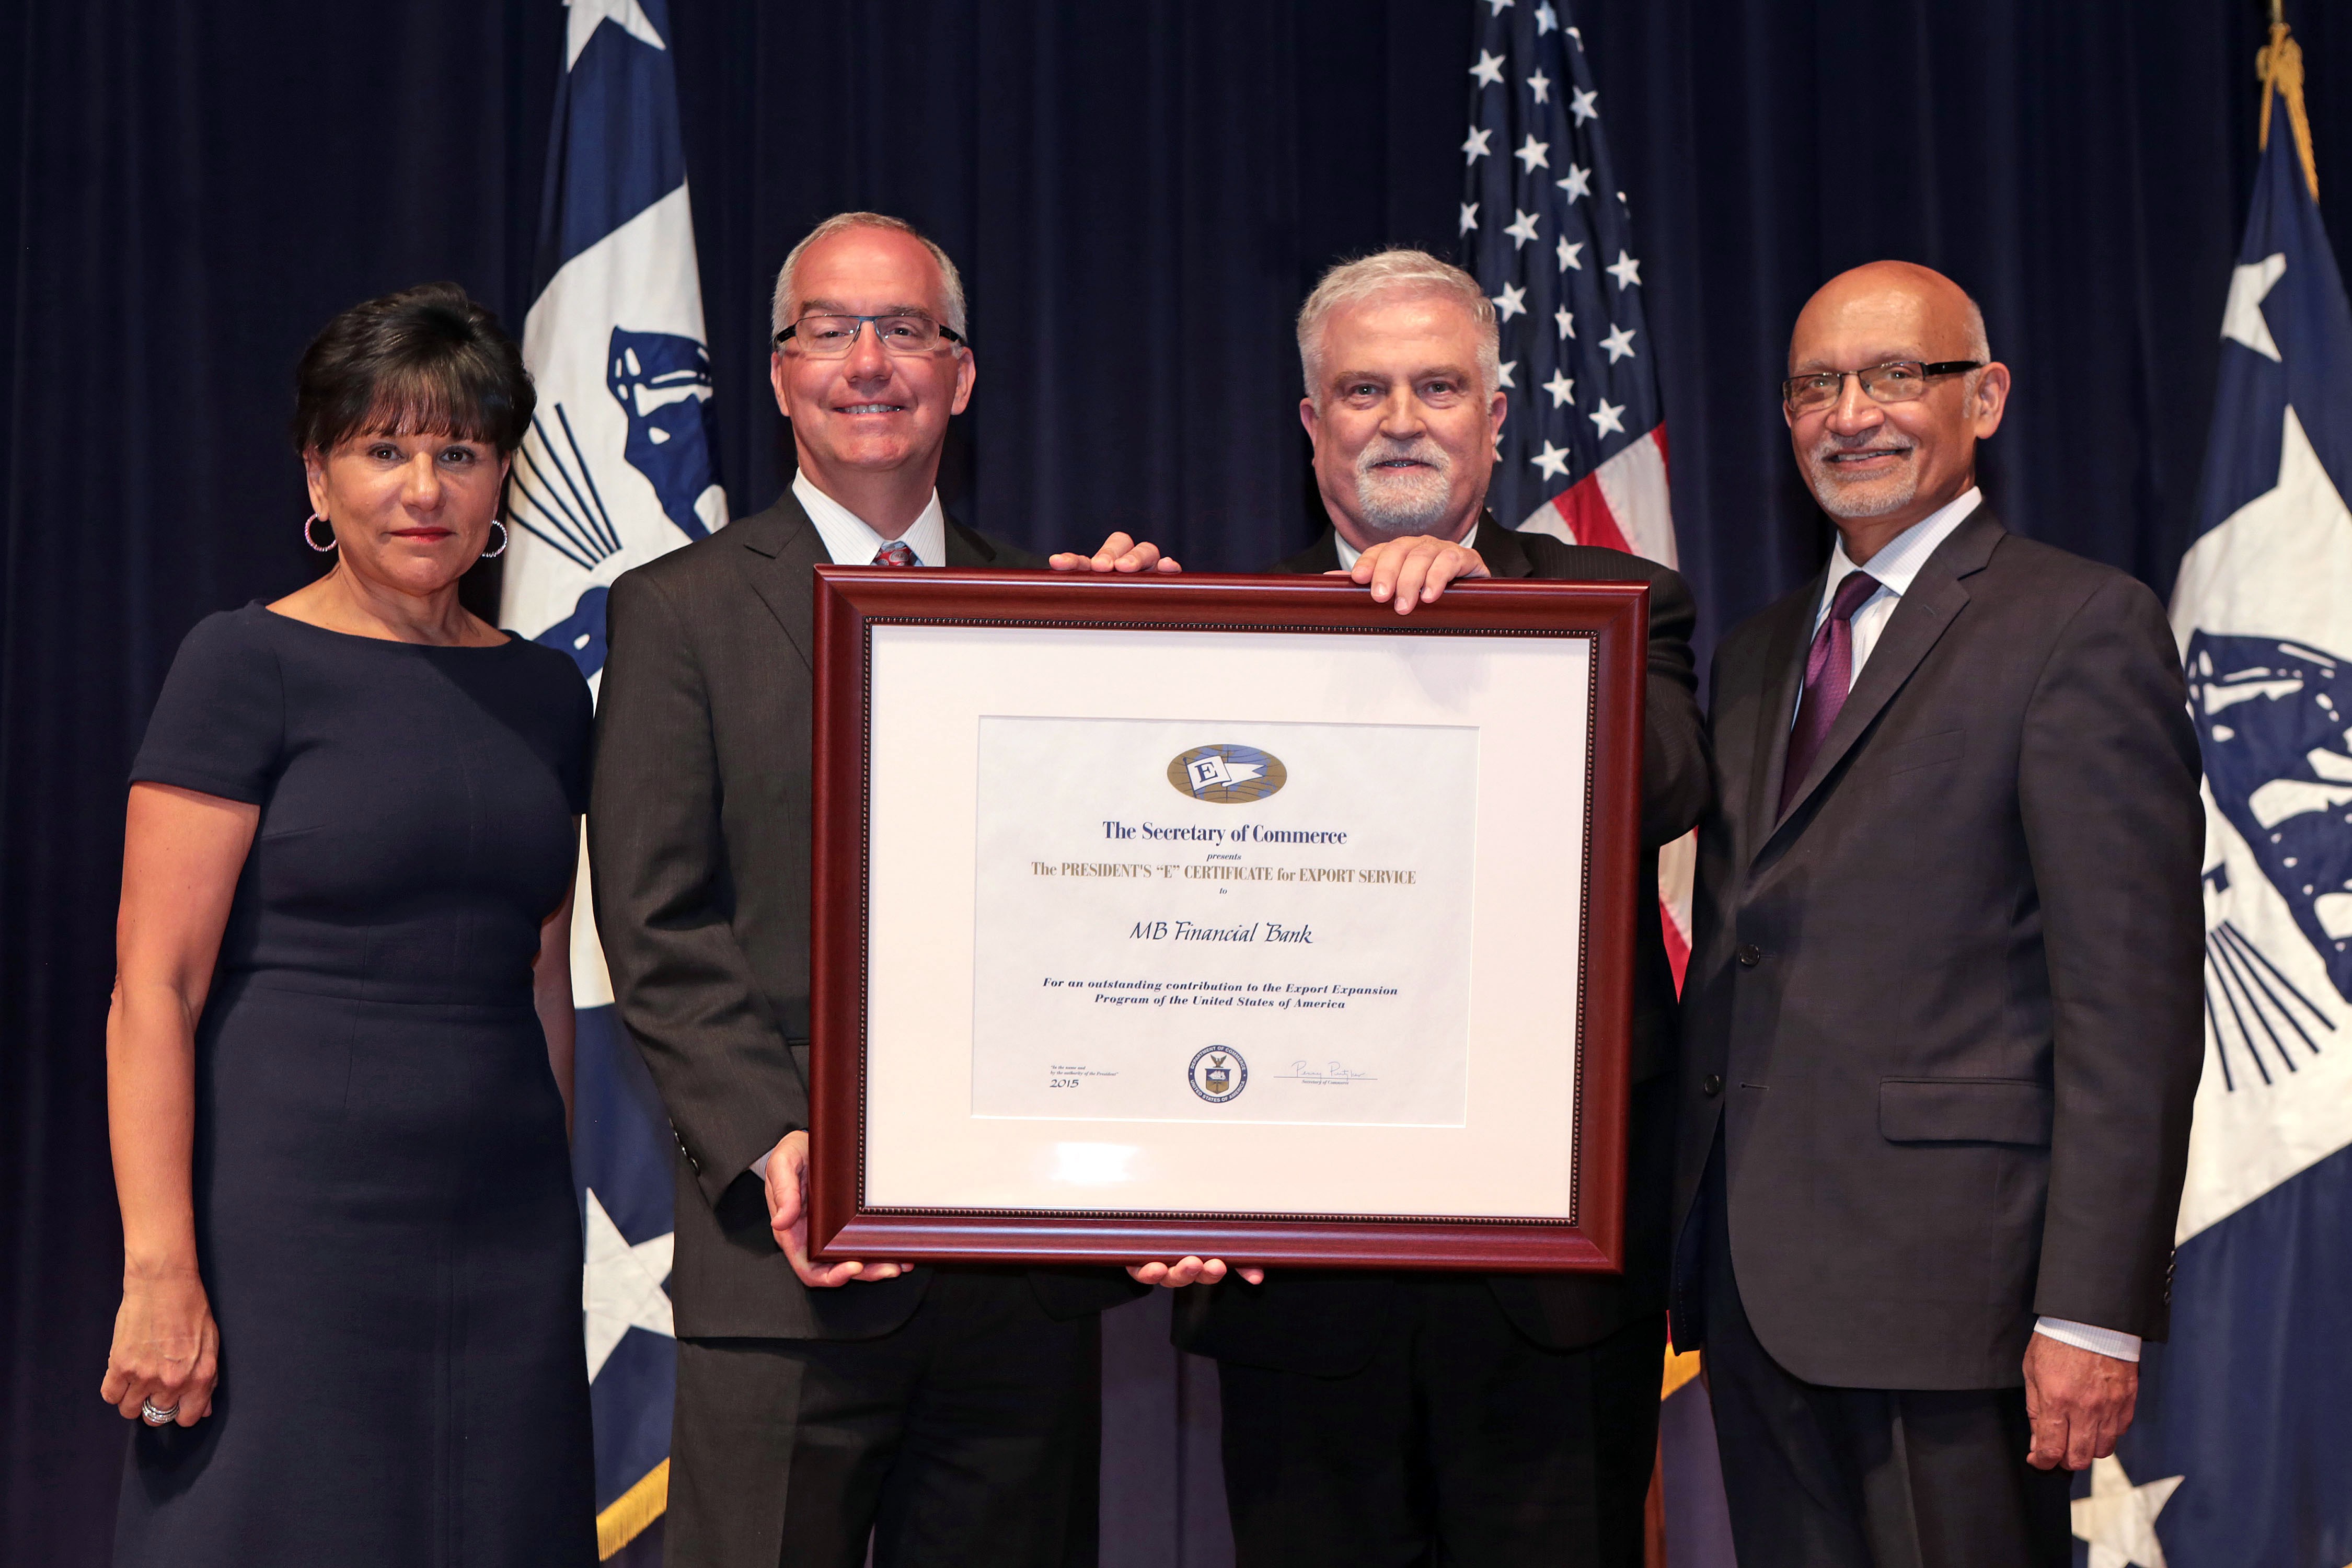 Commerce Secretary Penny Pritzker presents the 2015 President’s “E” Award for export services to MB Financial Bank, one of only two banks in the country receiving this recognition.